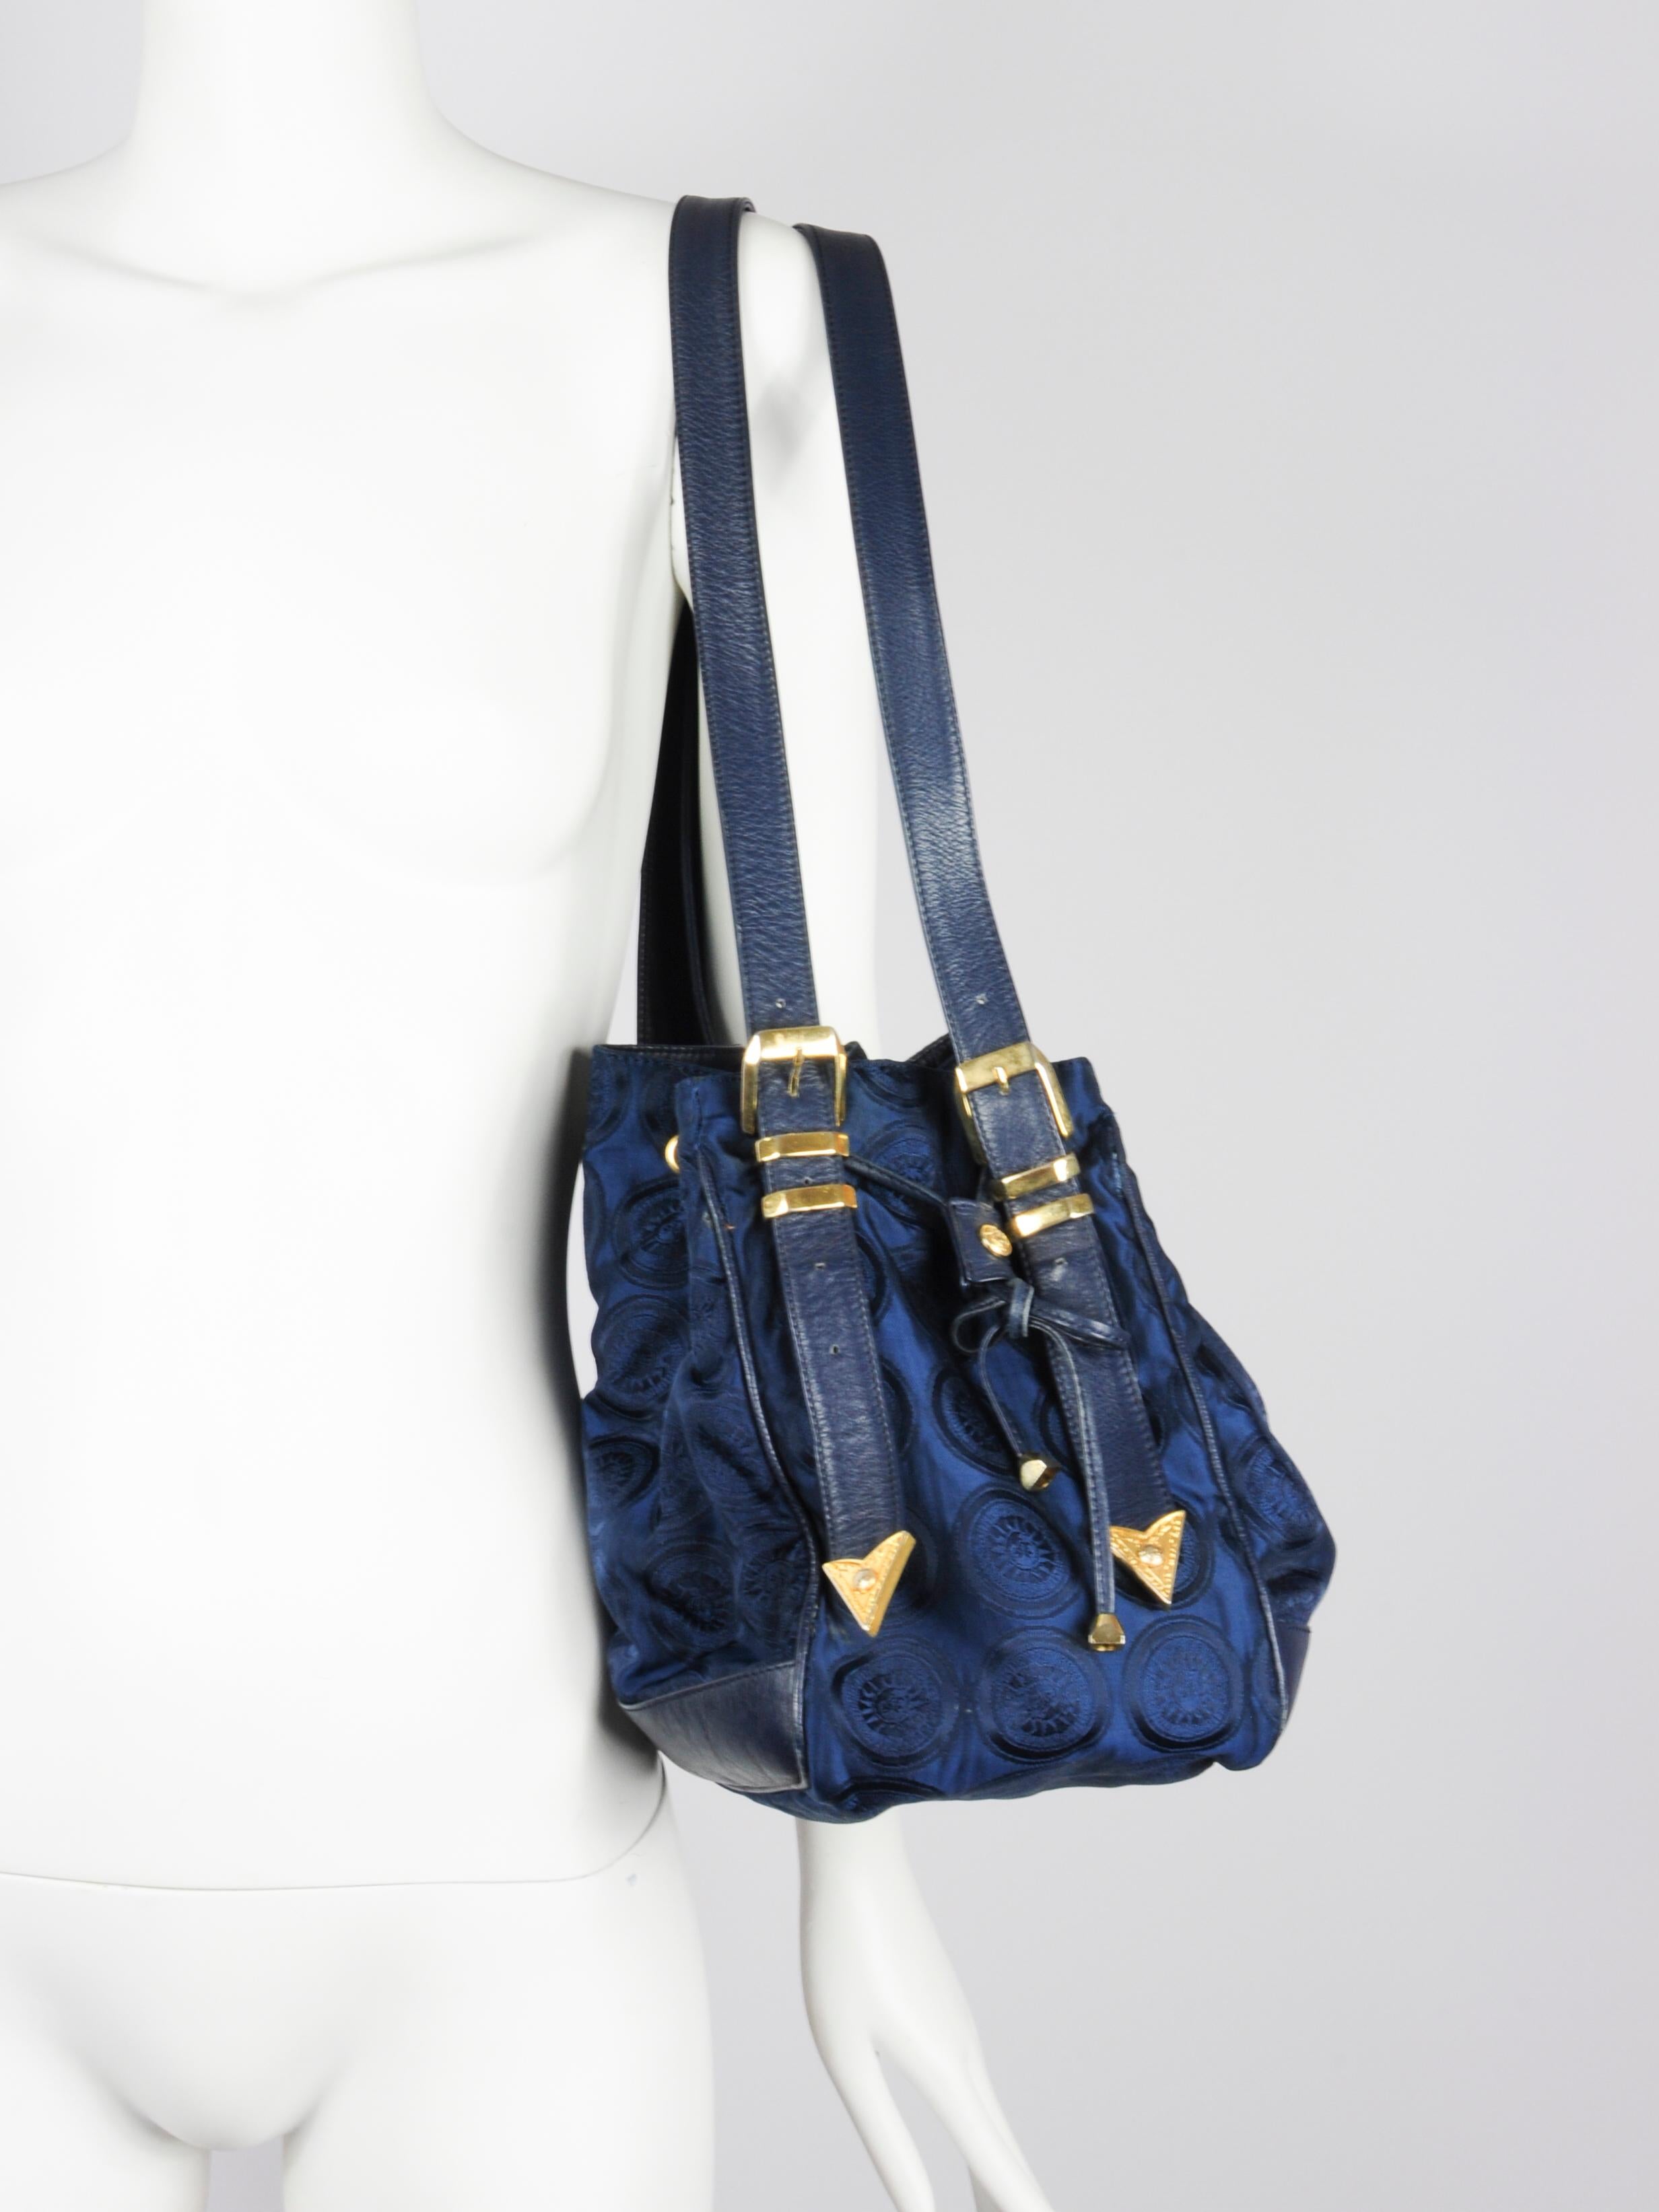 Gianni Versace shoulder bucket bag in navy blue with sun print and western and medusa details from the 1990s. The all-over signature Versace sun print in navy blue is beautiful and plays with the light. On the front the Gianni Versace name is